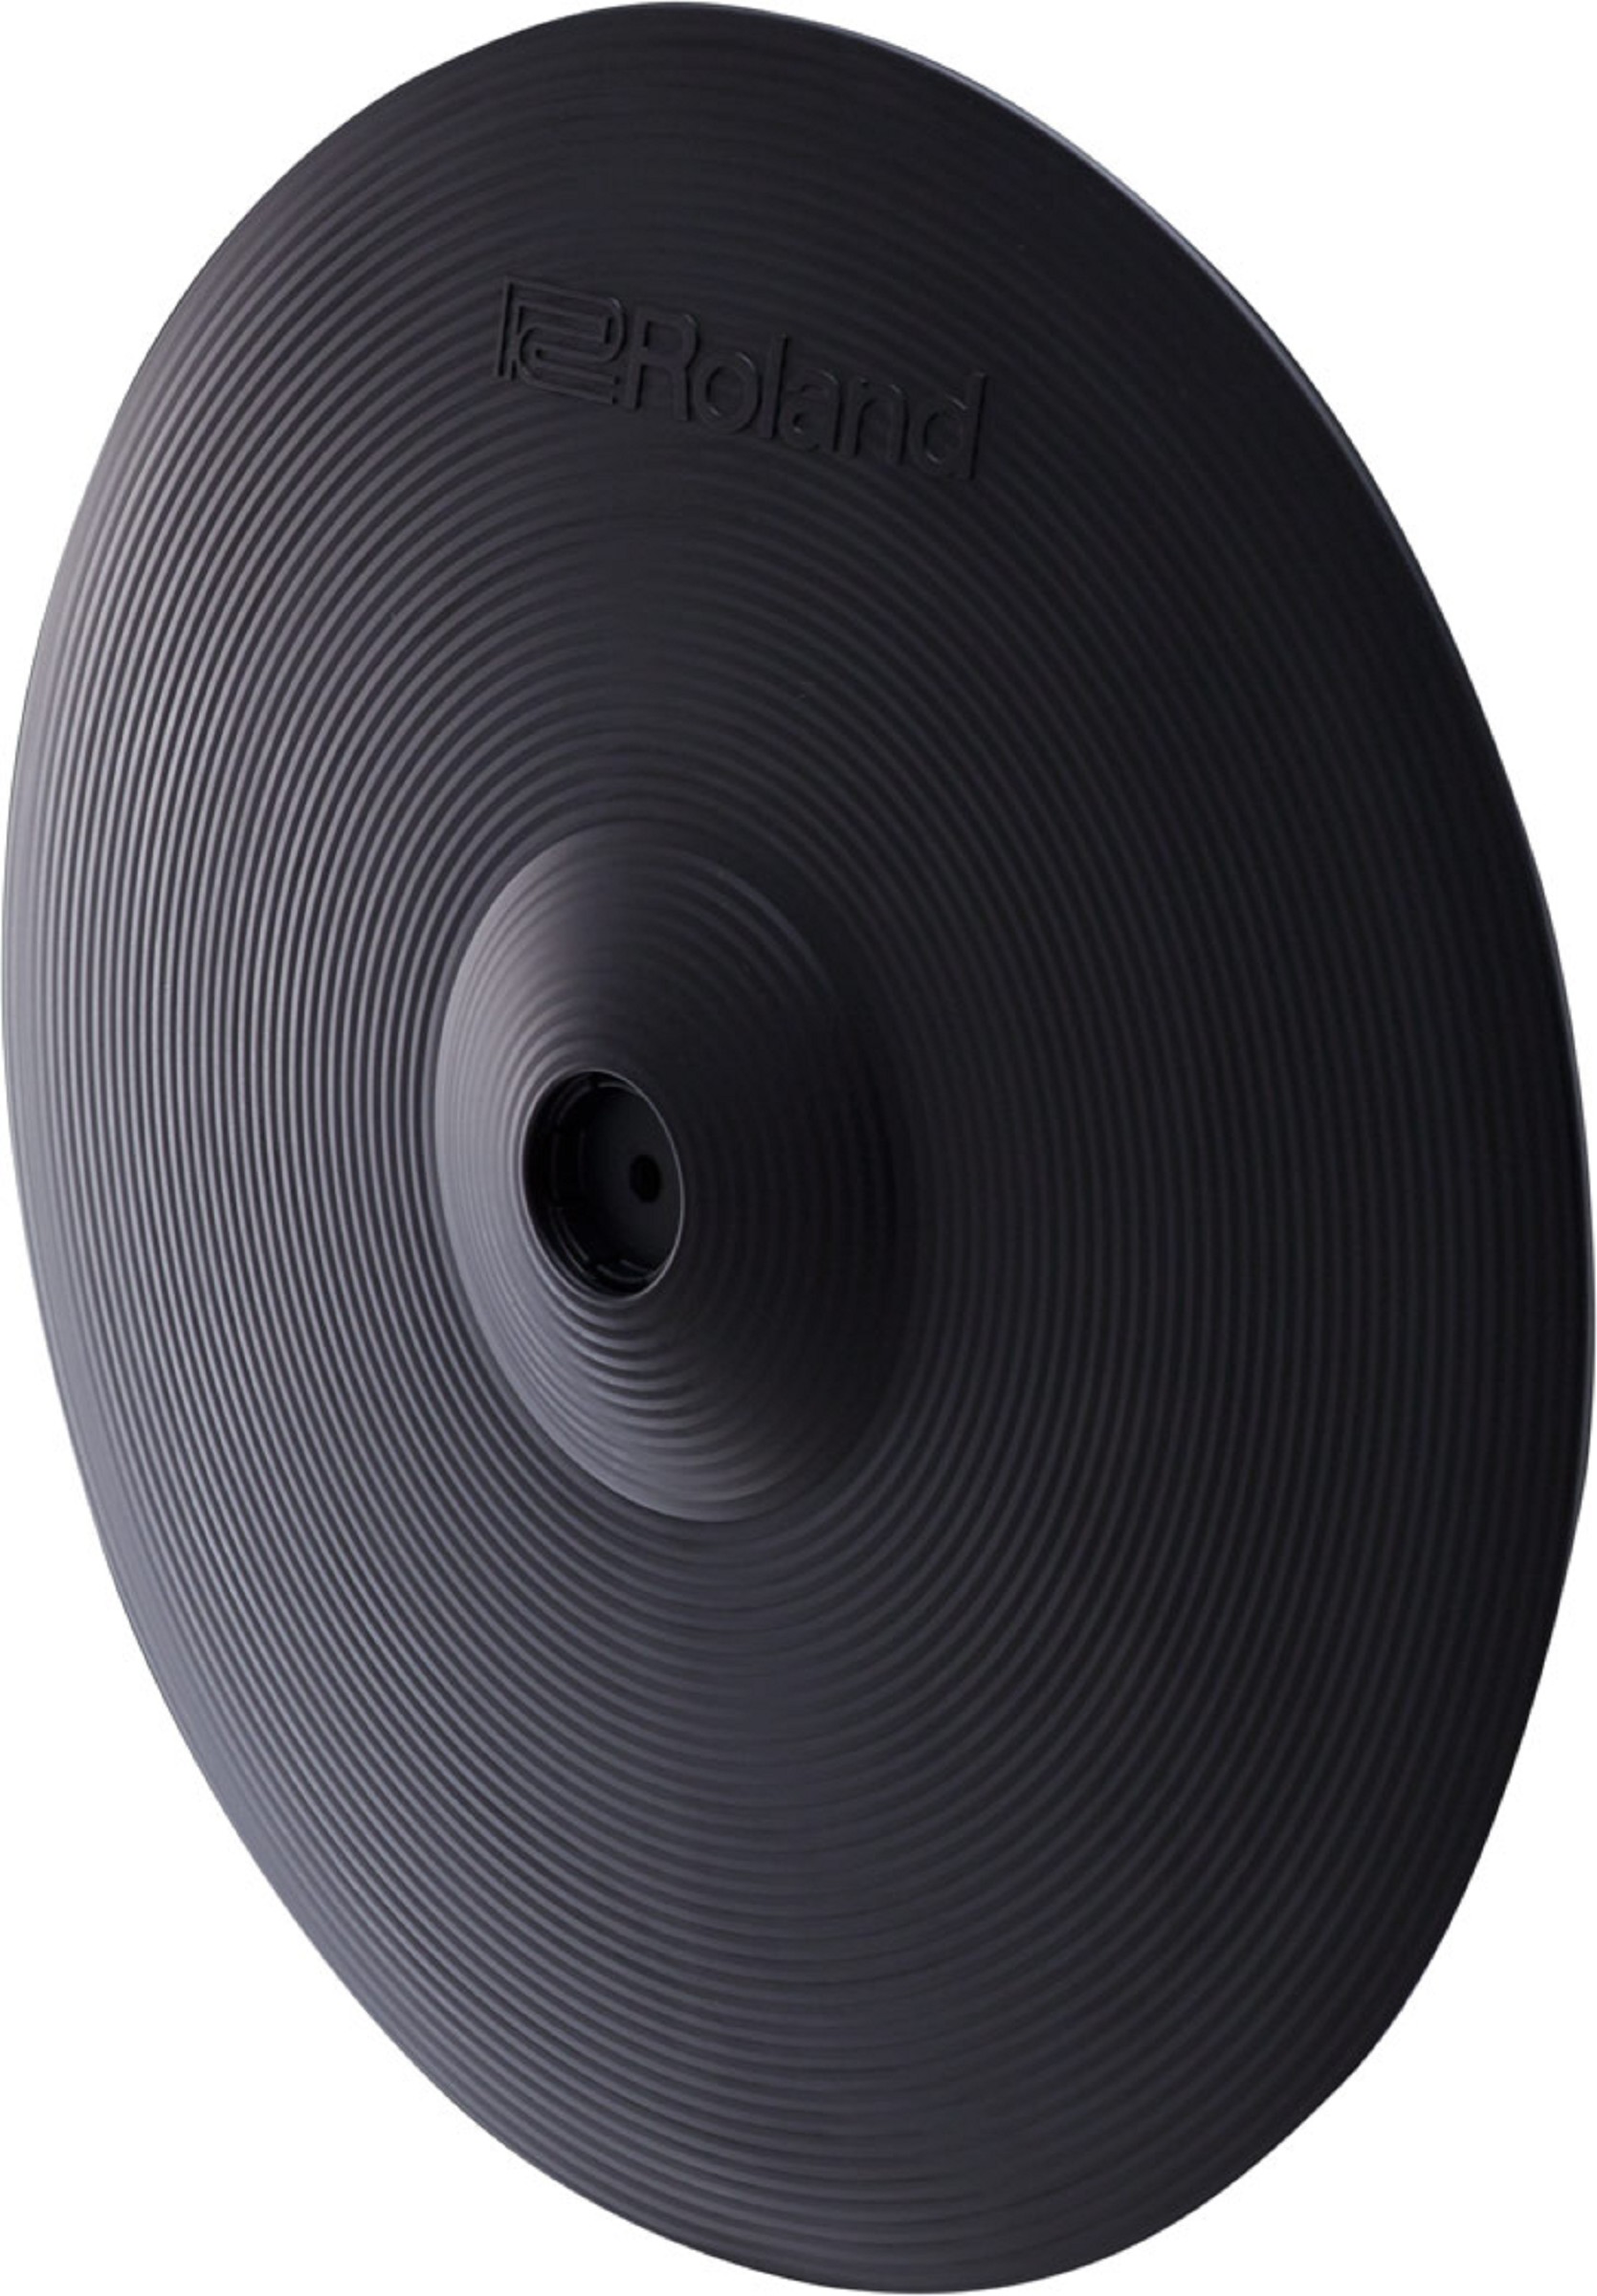 Roland CY-16R-T V-Drum Cymbal Pad Ride